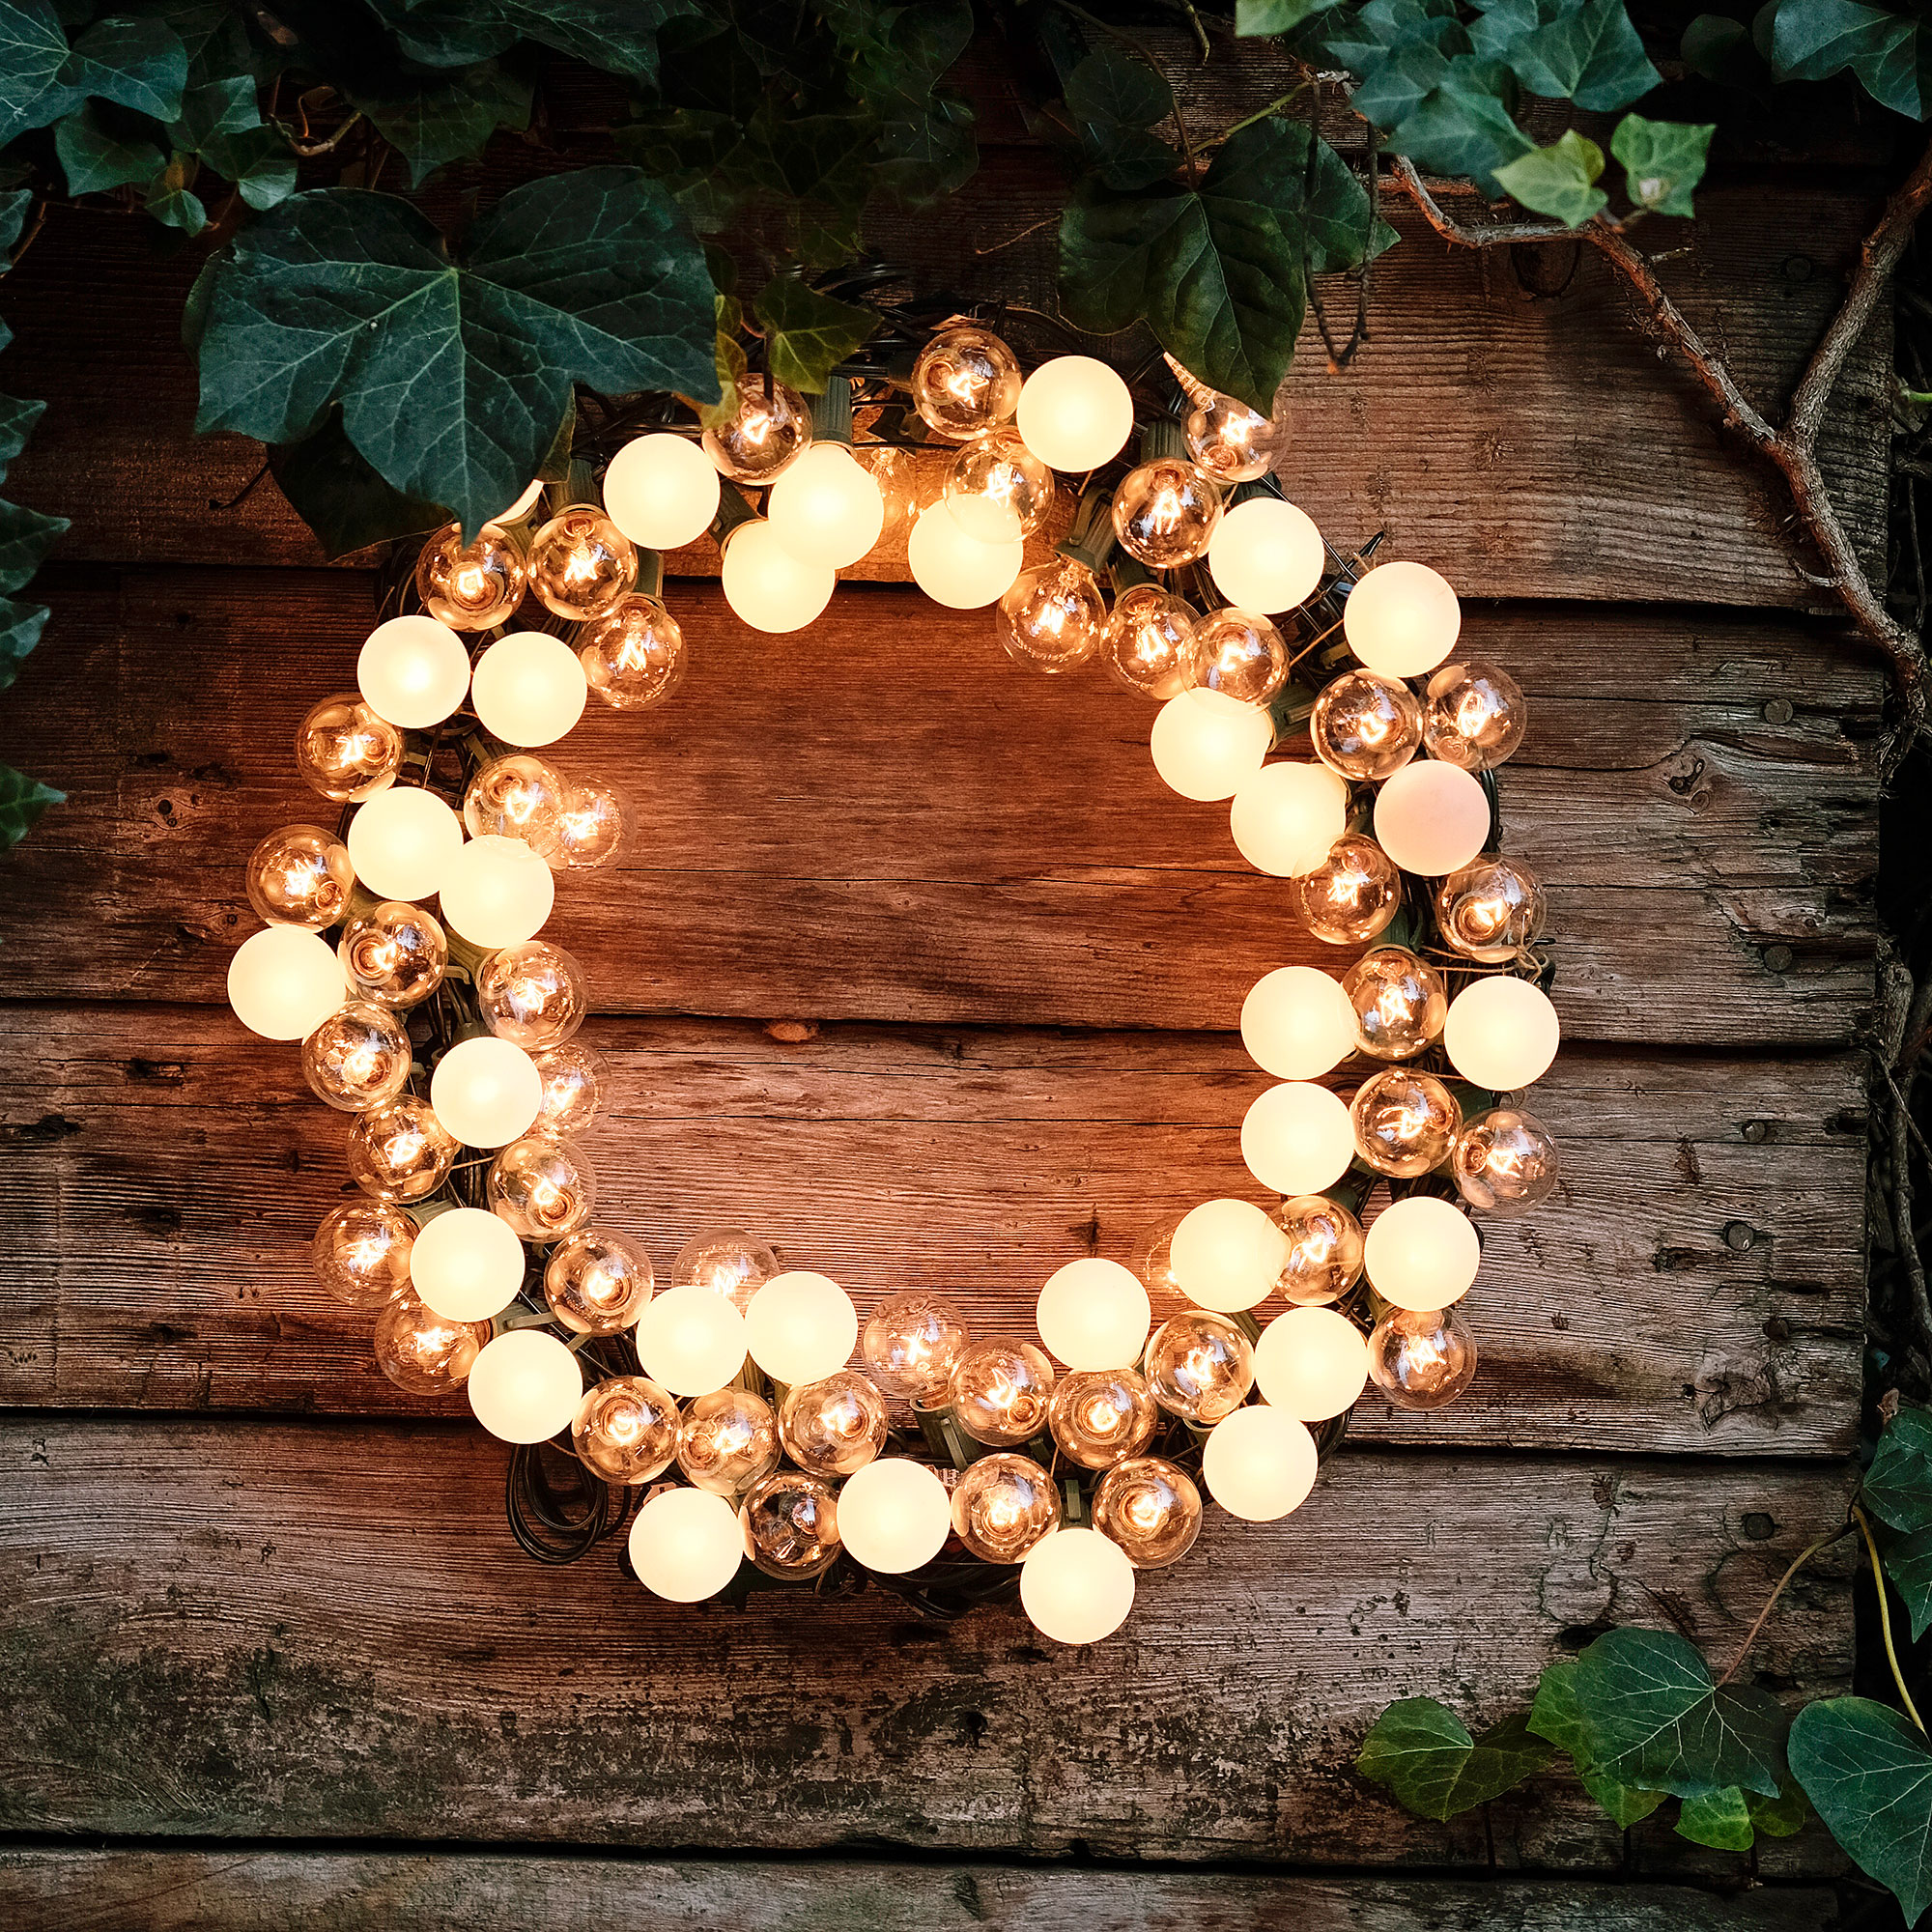 Outdoor décor for the holidays